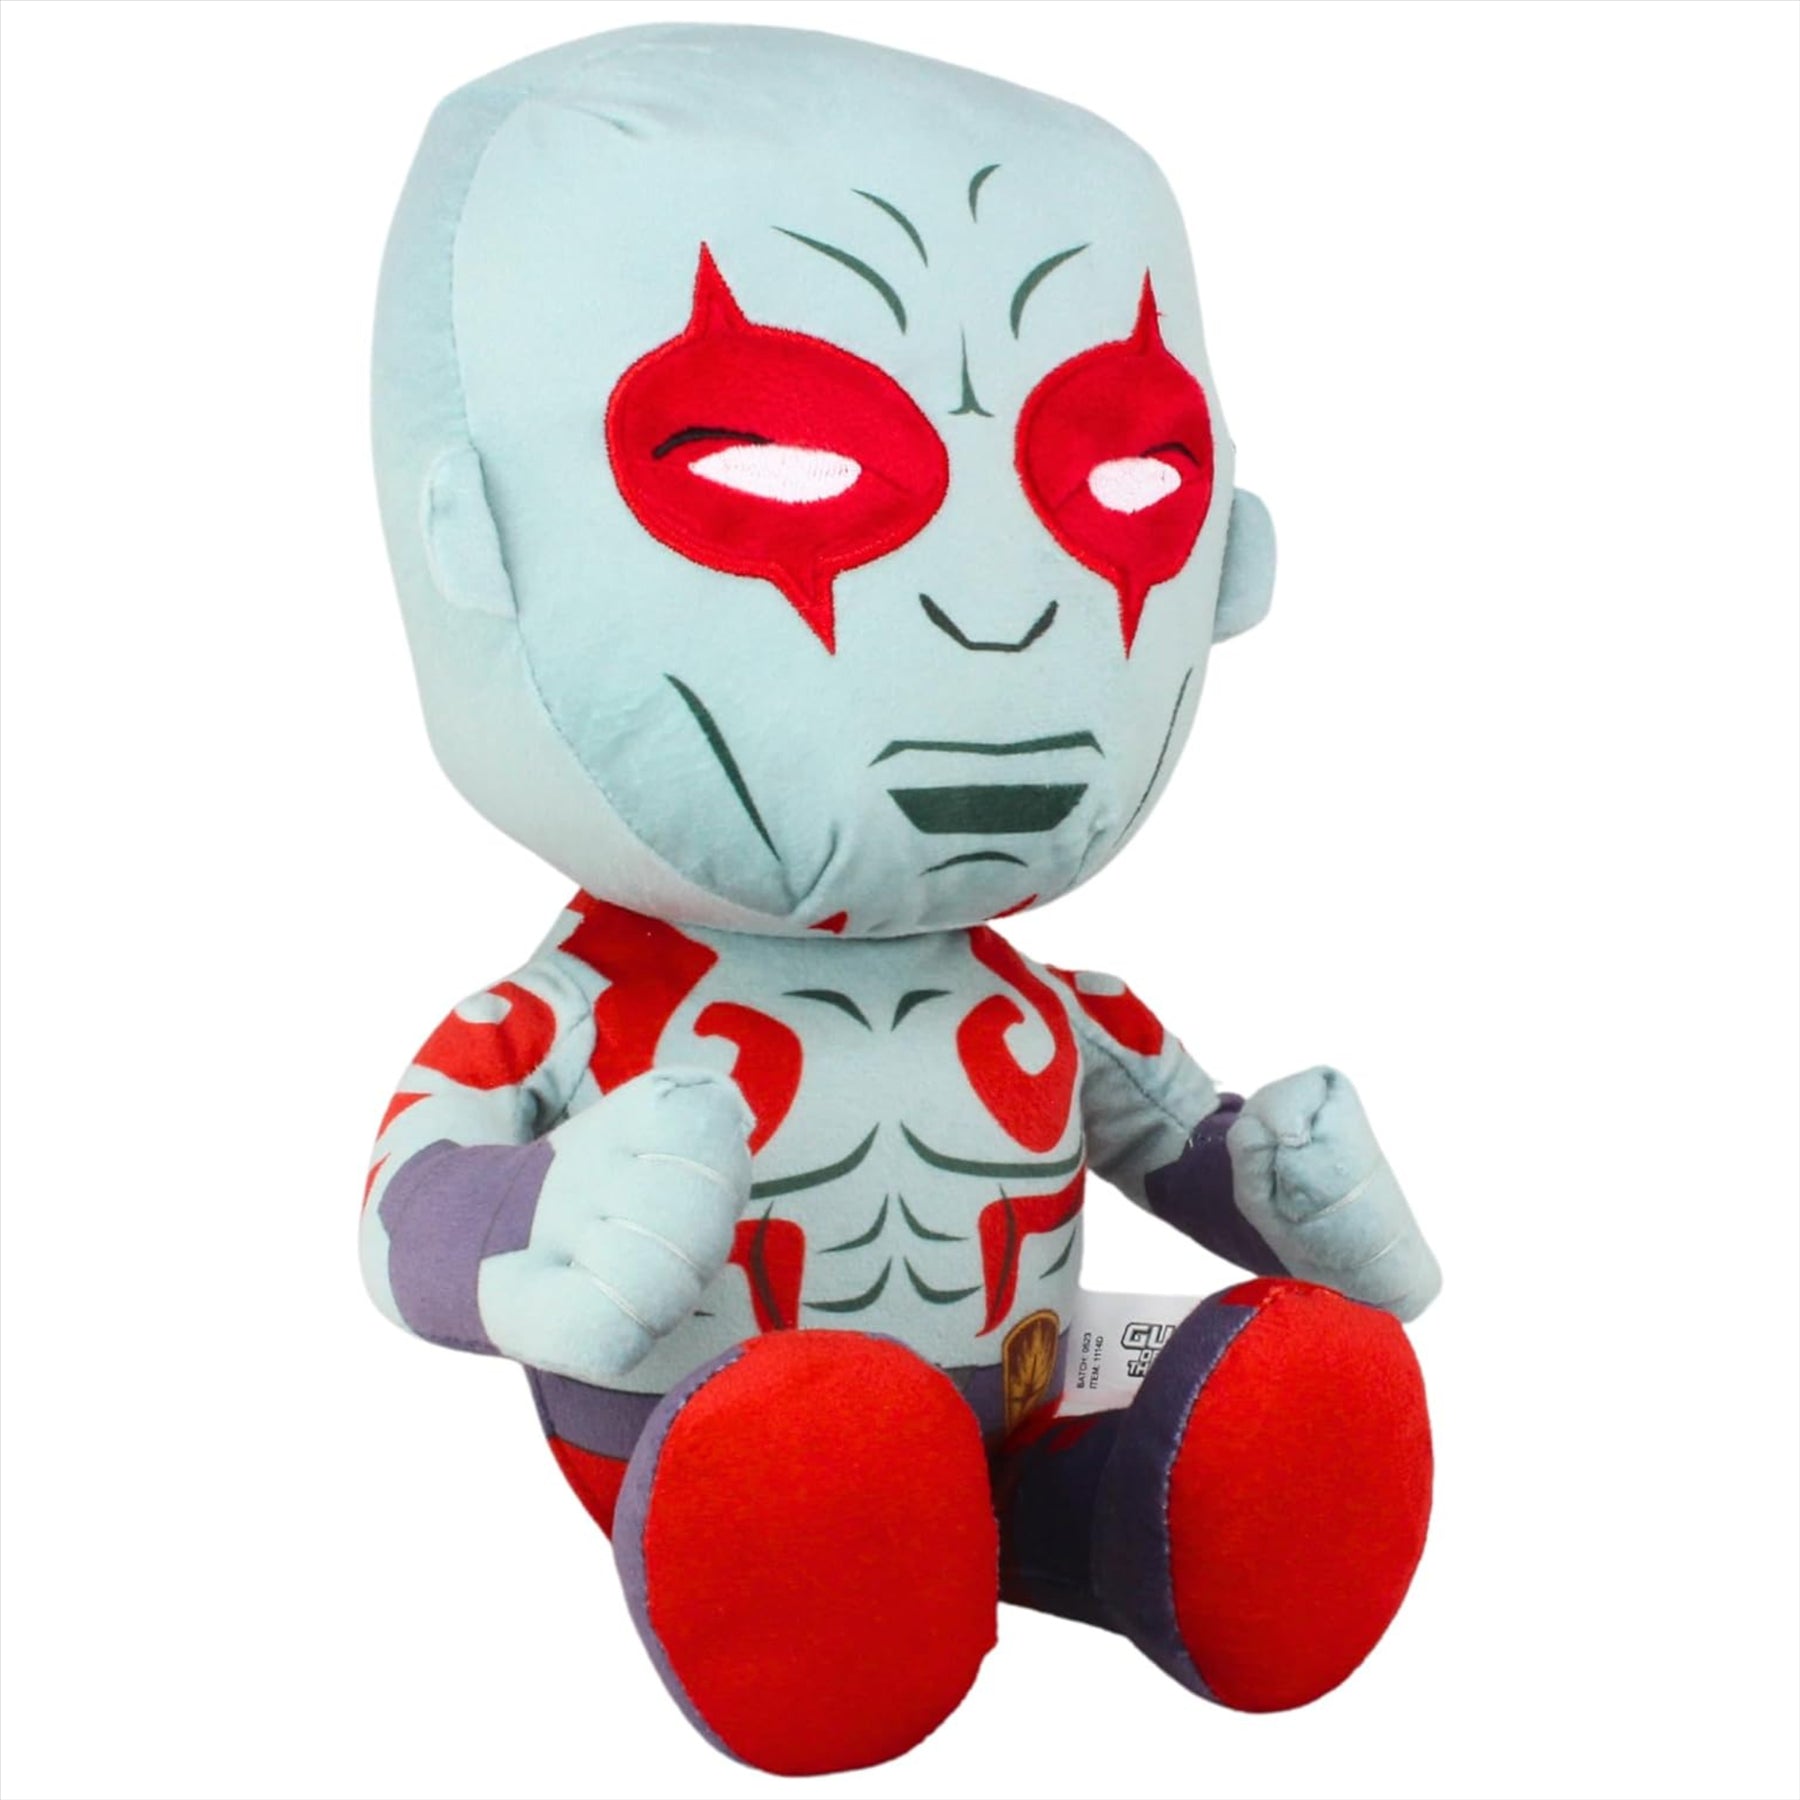 Guardians of the Galaxy Avengers Drax Super Soft Embroidered 36cm Plush Toy